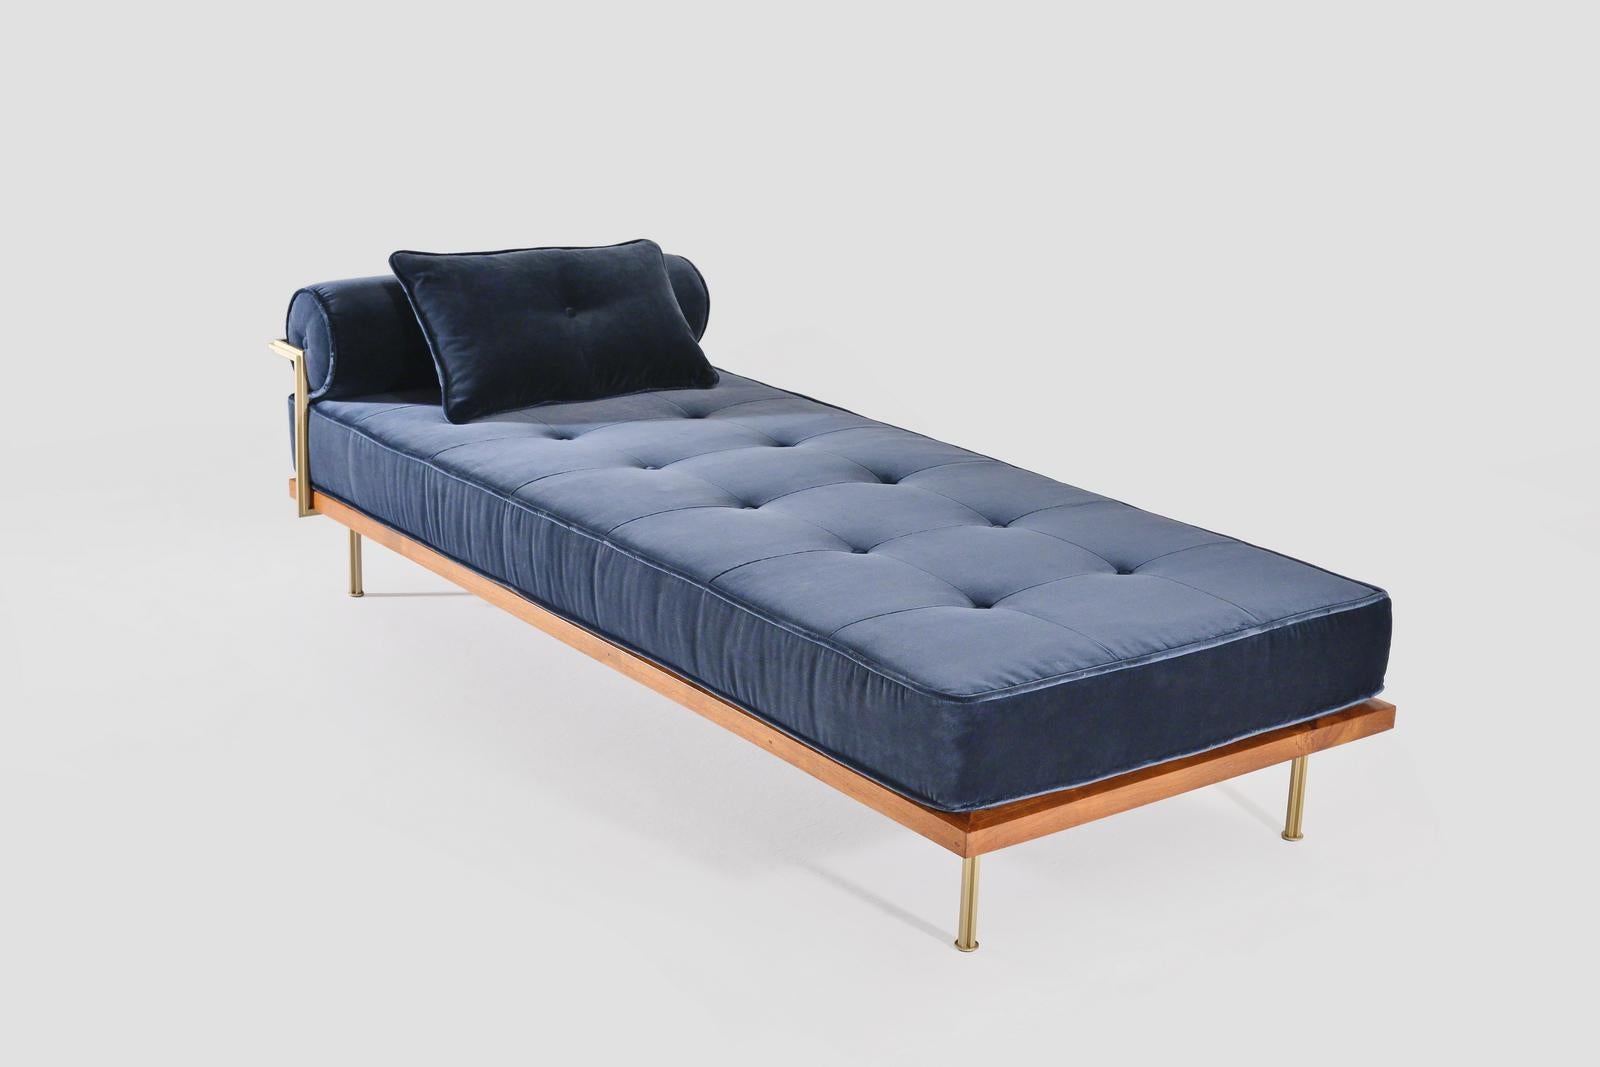 Classic daybed, reclaimed teak wood and brass structure in golden sand, by P. Tendercool
 
Made to your order. We just created this daybed for a New York based client who opted for Jim Thompson fabric.
We do not carry our own fabric collections so